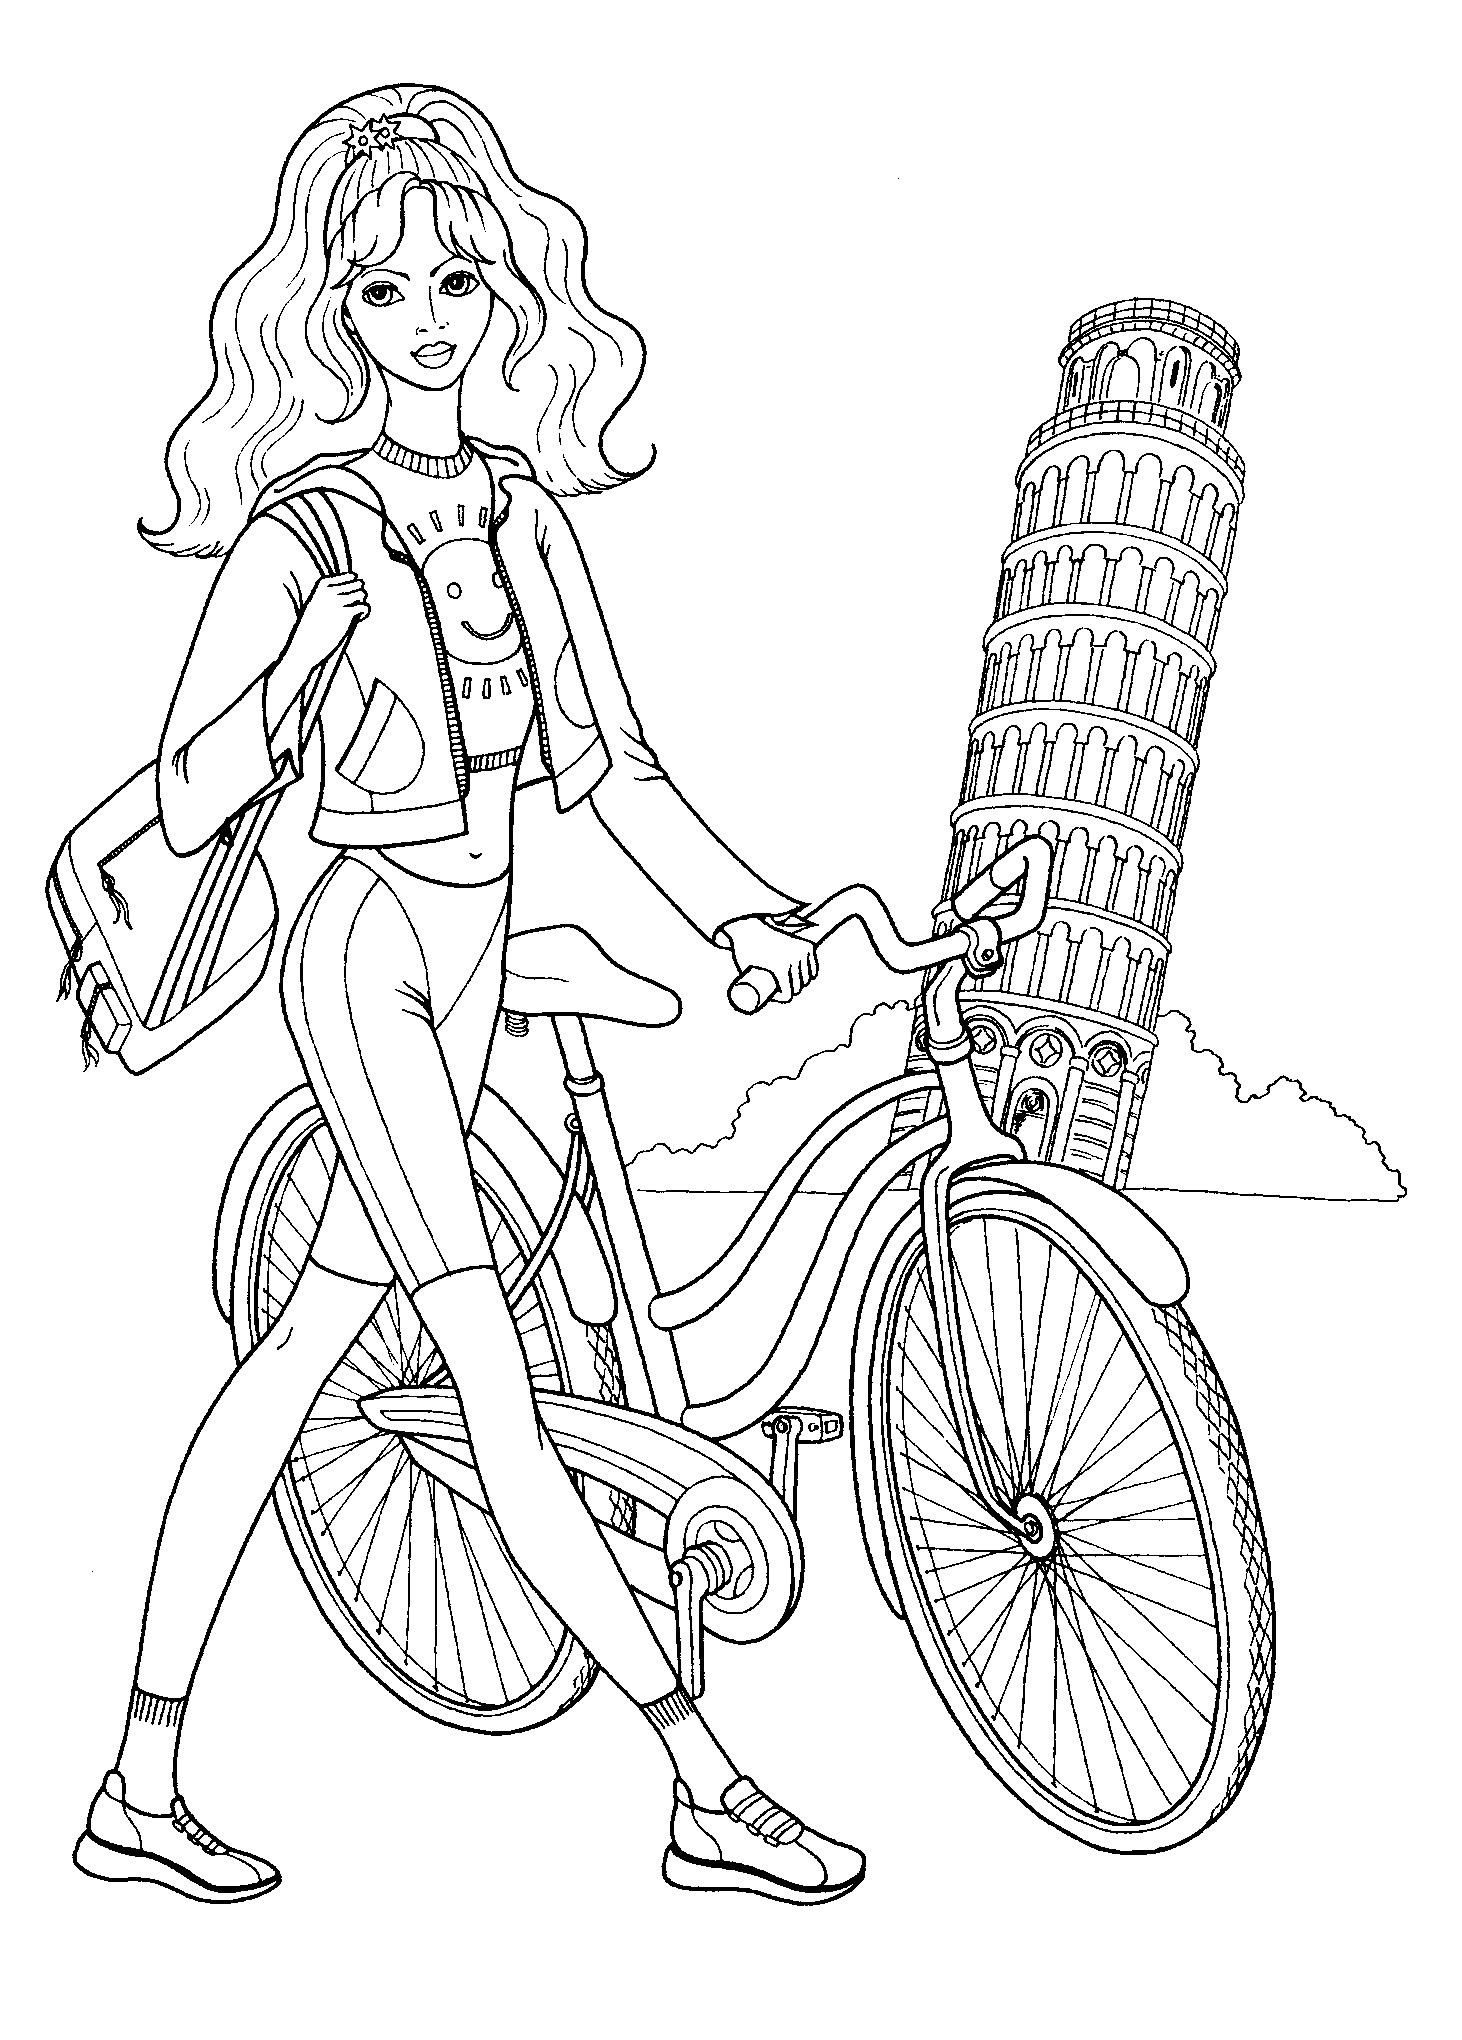 Detailed Coloring Pages For Teenage Girls
 Fashionable girls coloring pages 7